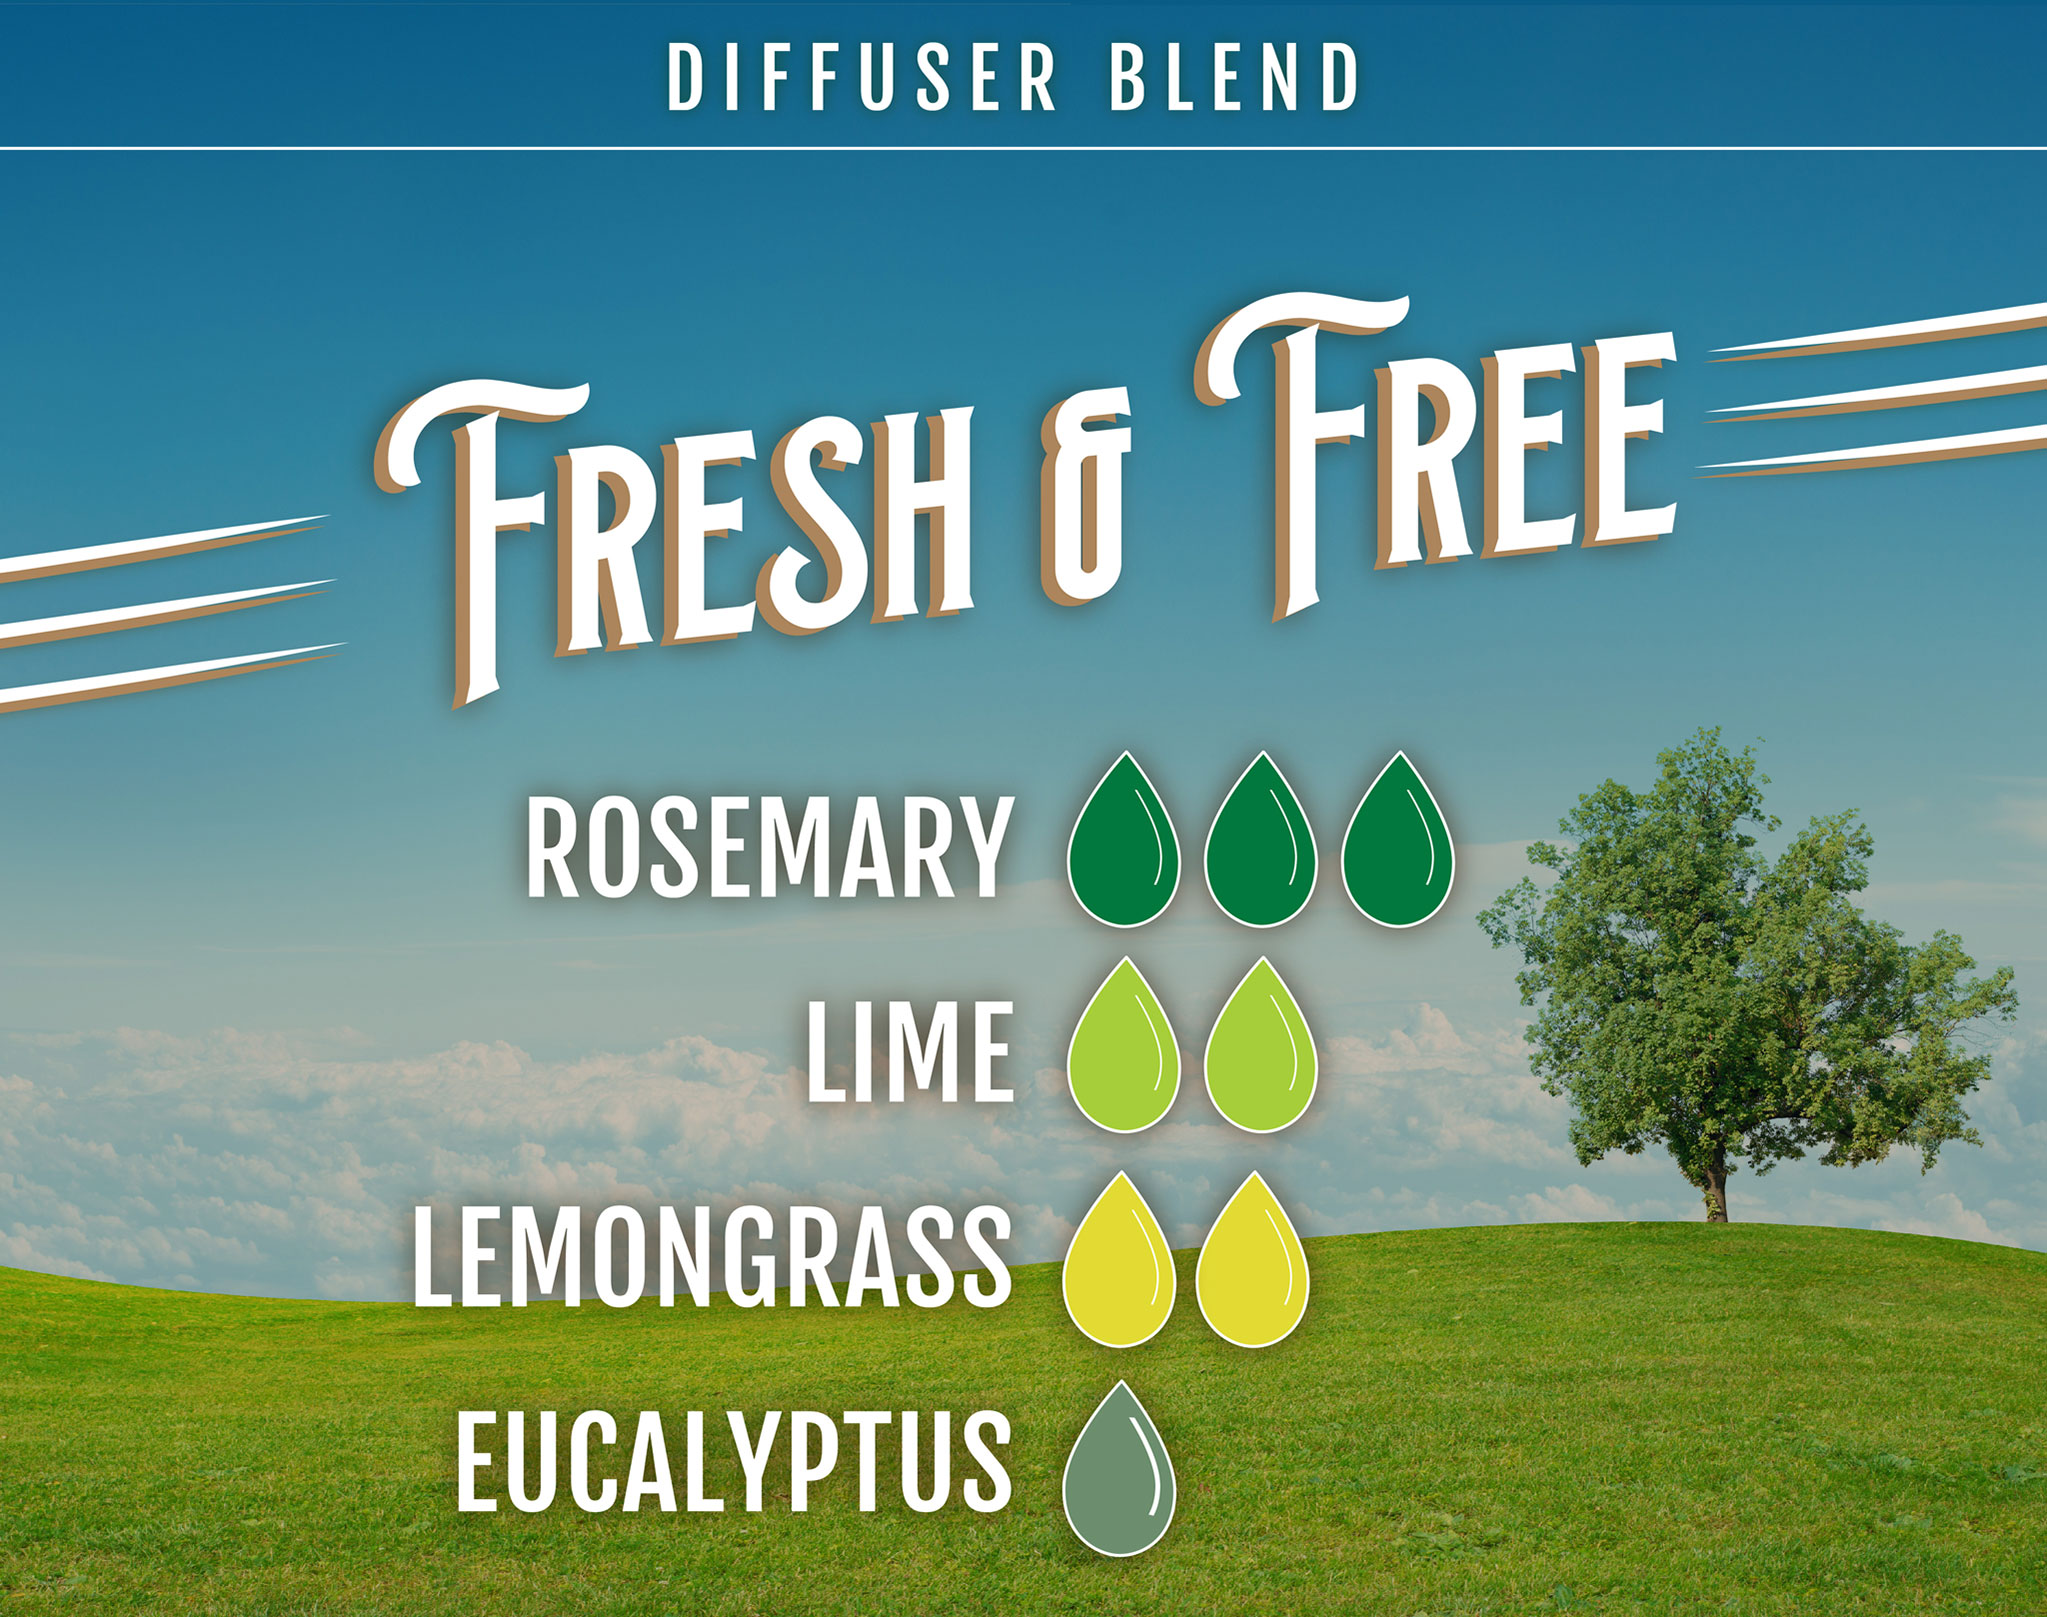 Fresh and Free Rosemary Essential Oil Diffuser Blend - 3 drops of rosemary, 2 drops of lime, 2 drops of lemongrass, 1 drop of eucalyptus